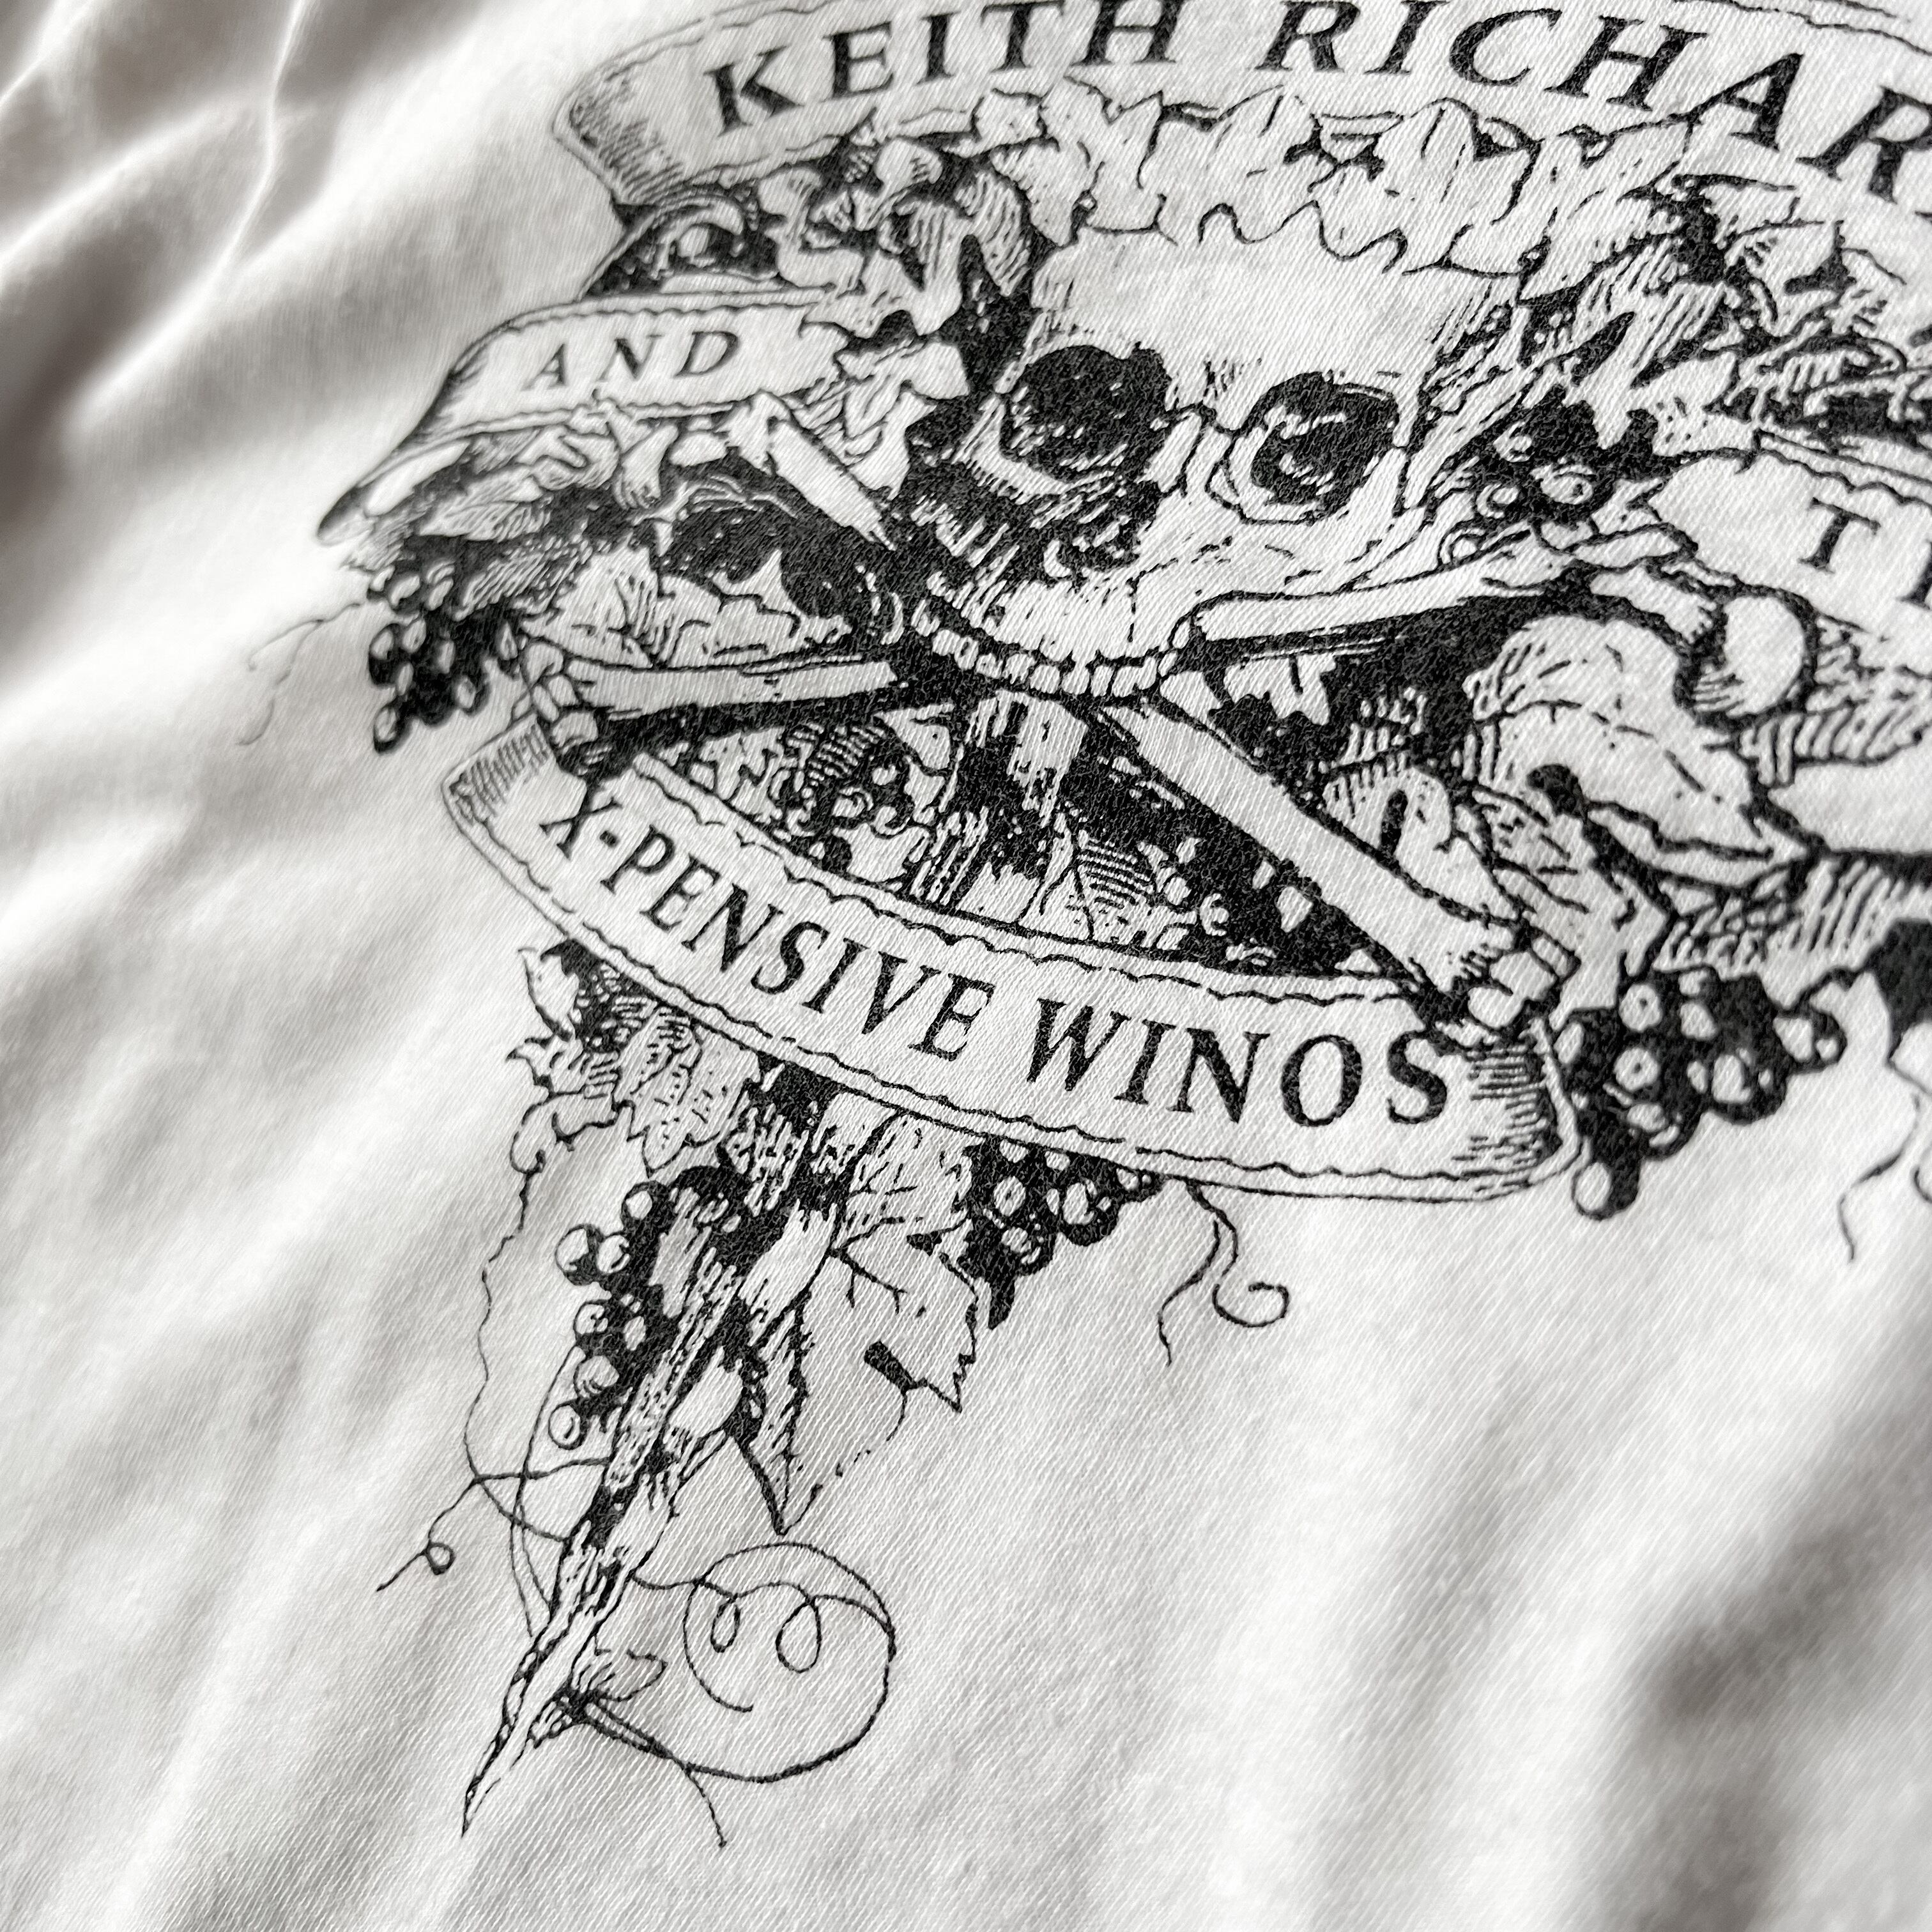 80s-90s “ Keith Richards and the X-Pensive Winos” band tee キース 